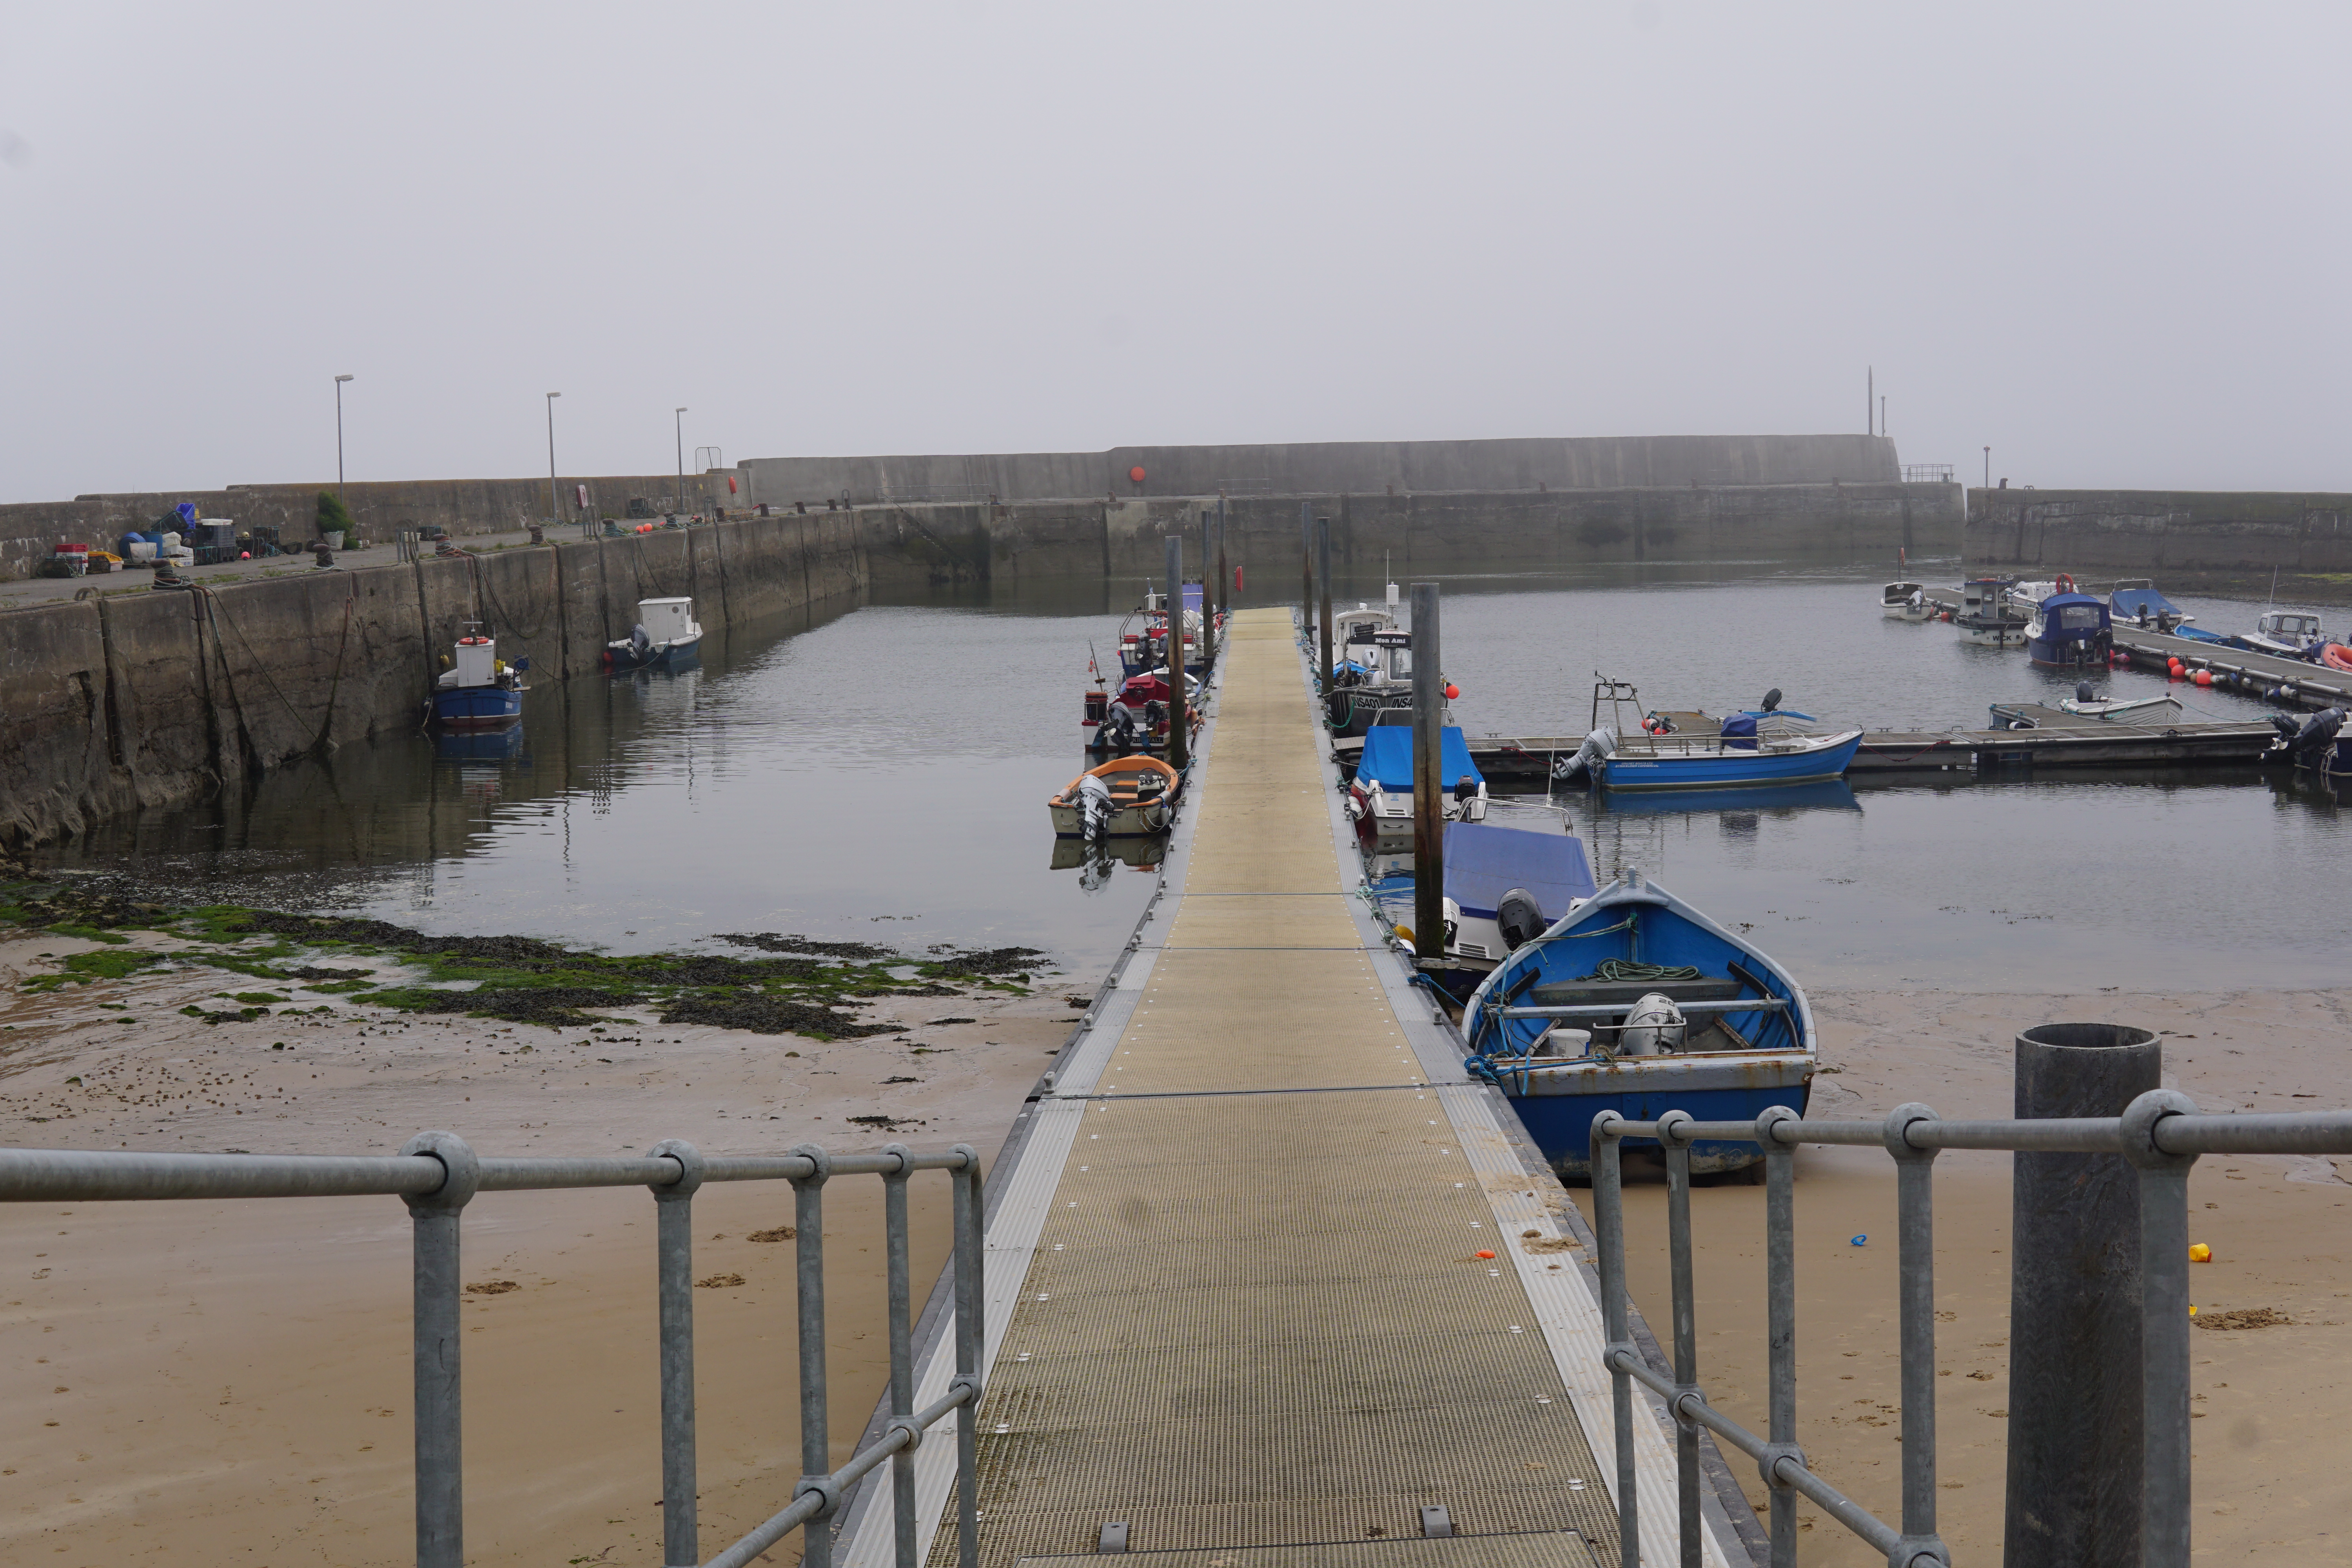 An image of the harbour in Balintore, one of the places to park overlooks it.